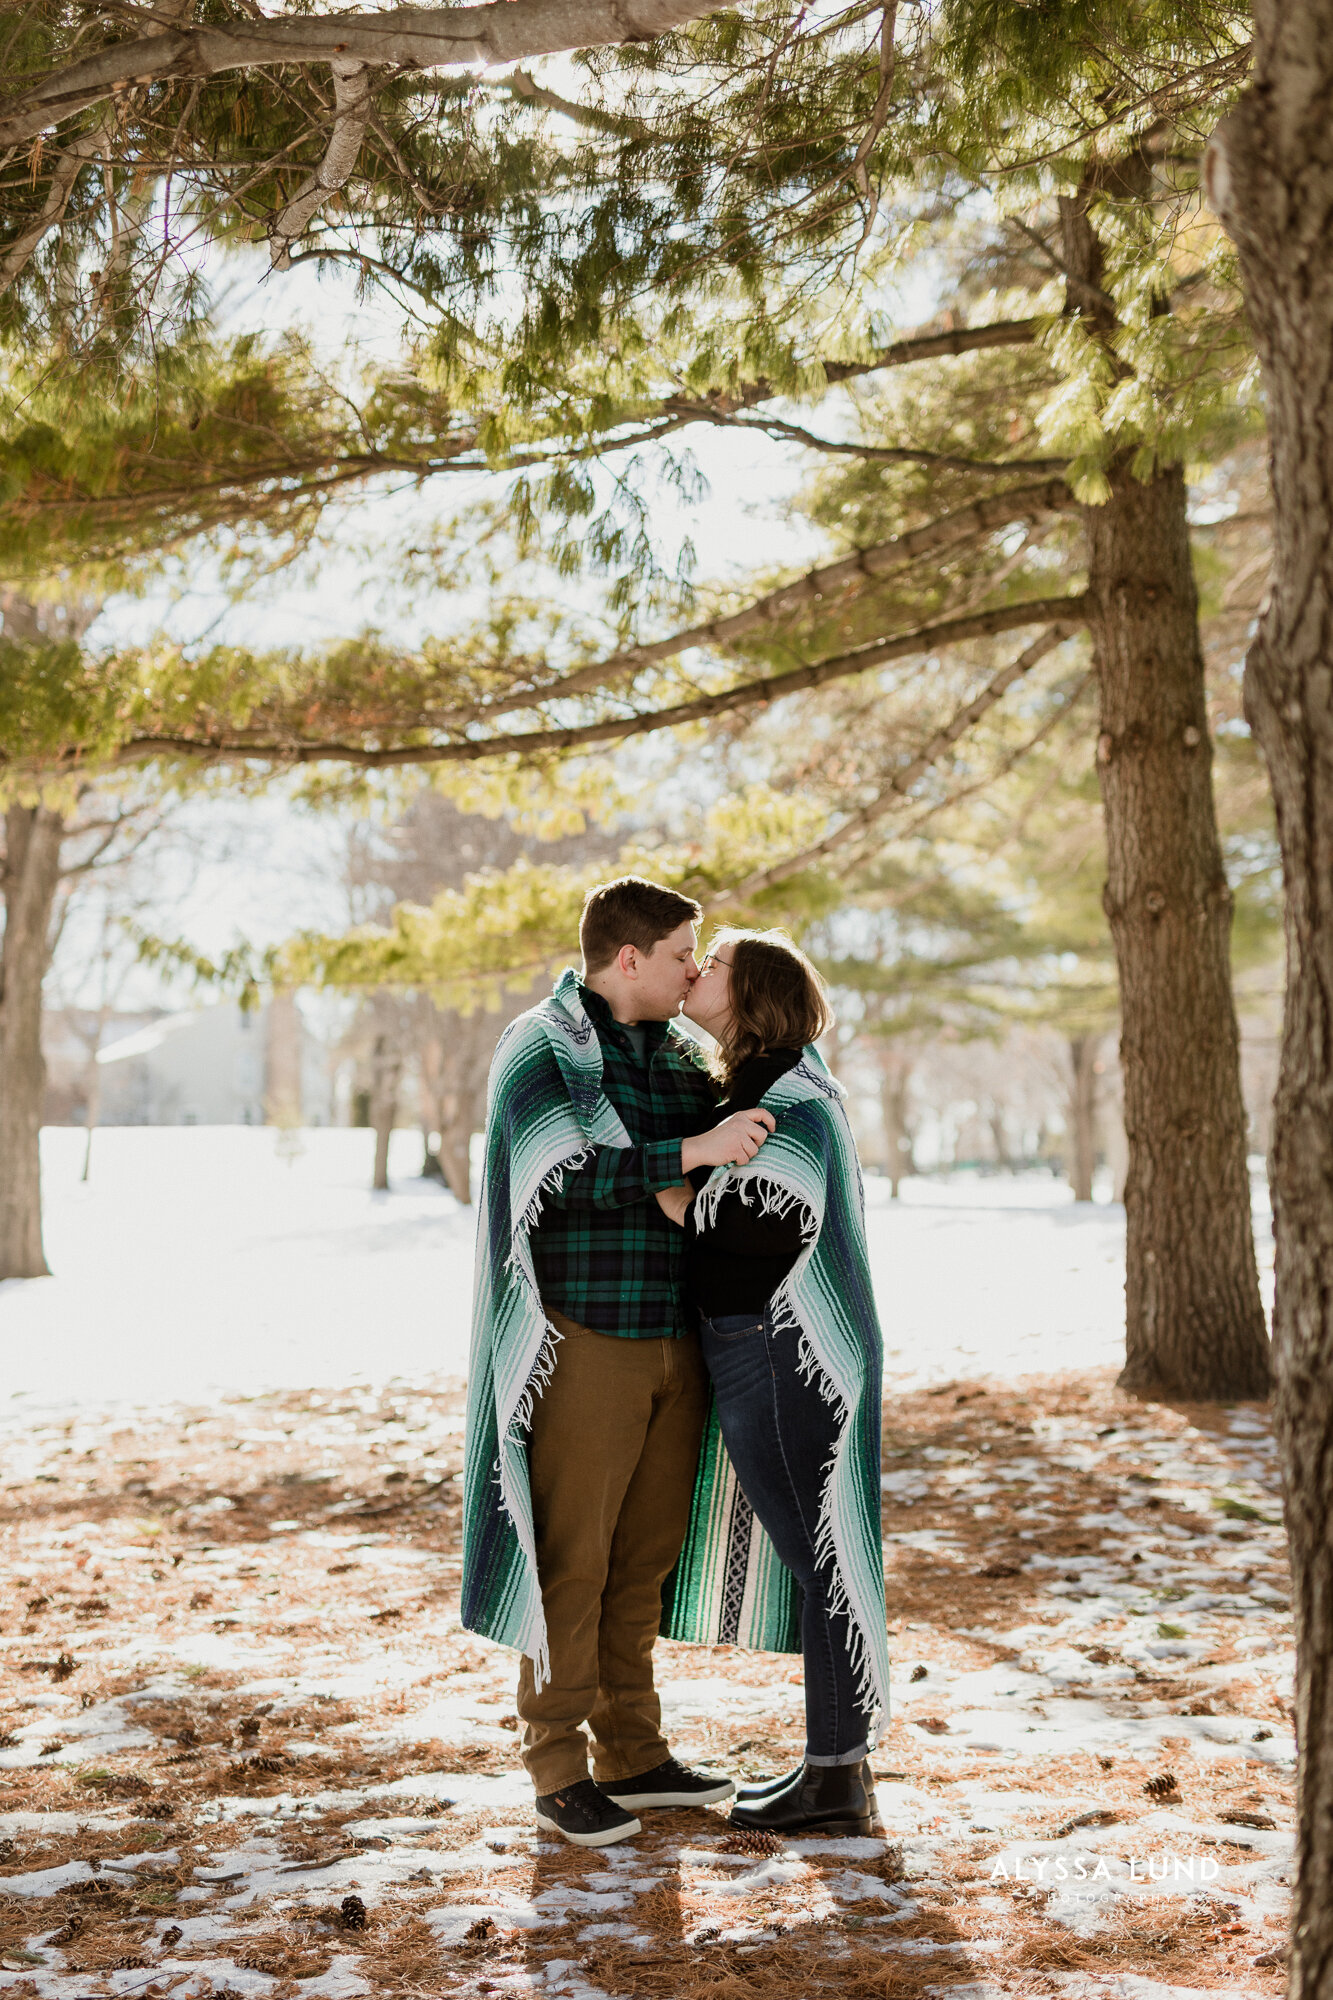 Minnesota outdoor engagement photography in the winter-5.jpg